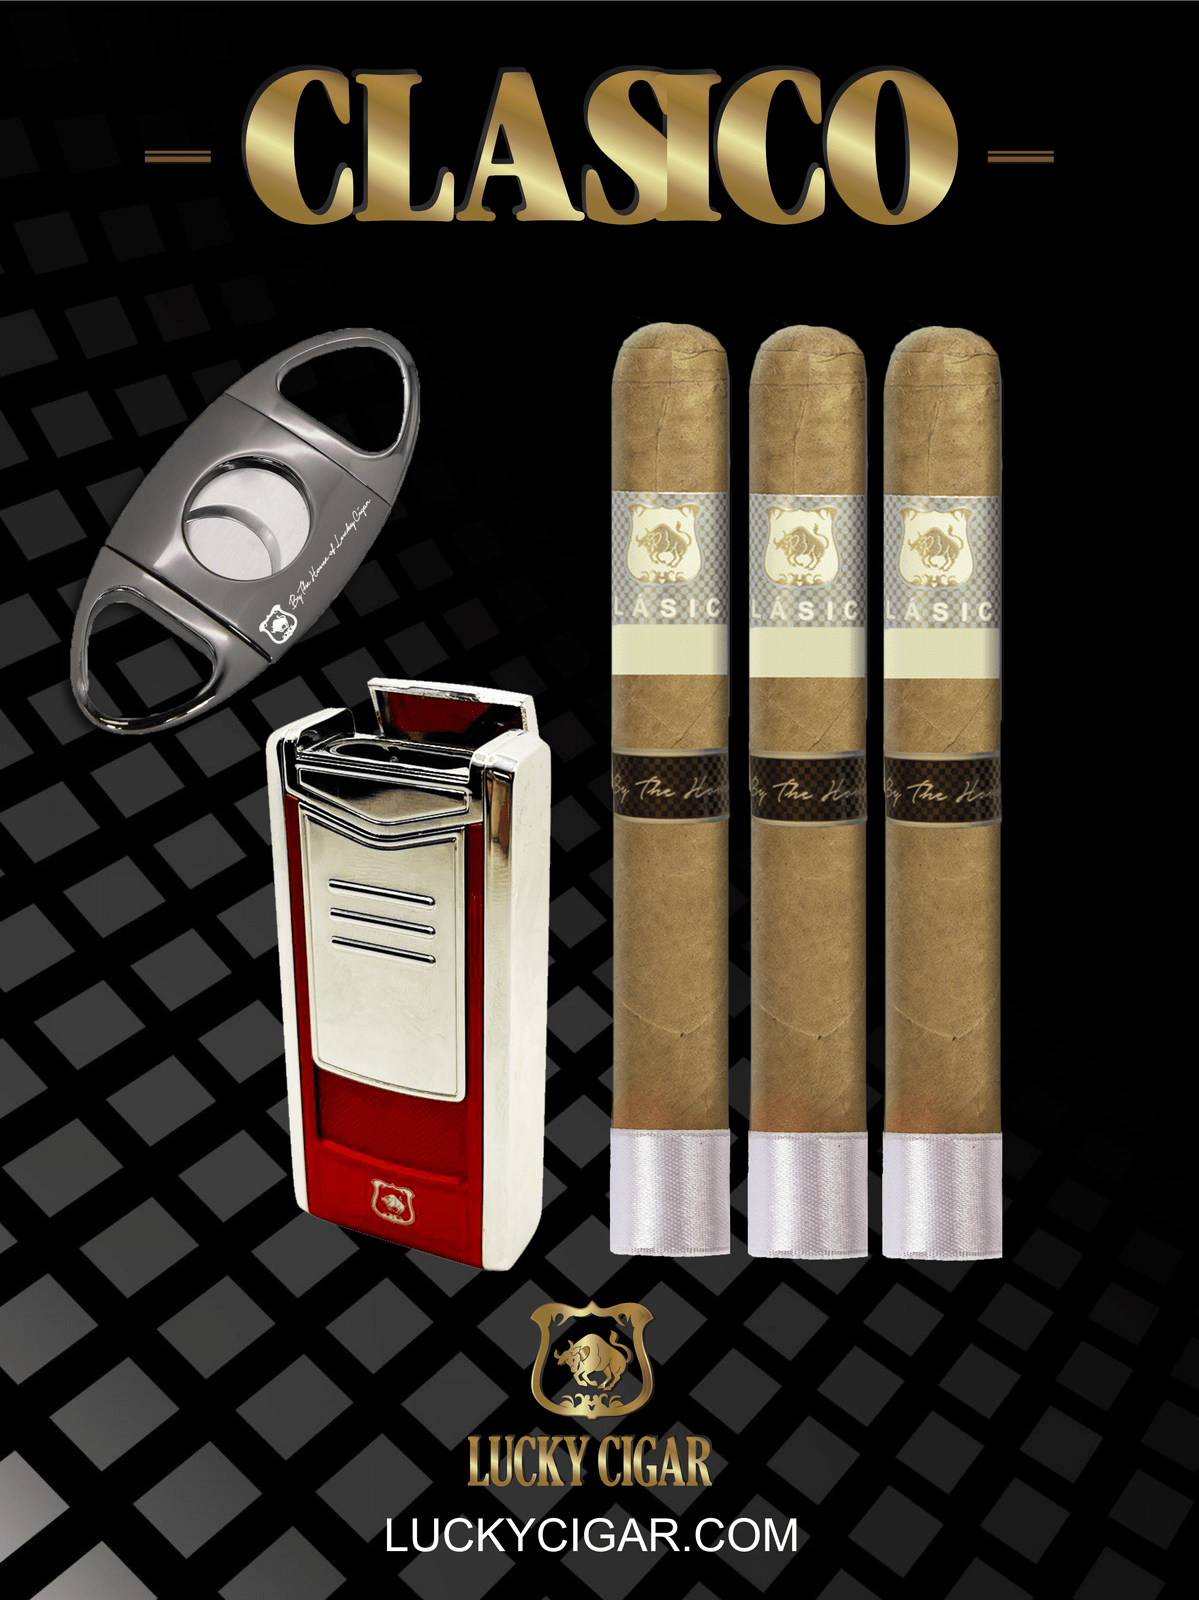 Classic Cigars - Classico by Lucky Cigar: Set of 3 Cigars, 3 Toro with Cutter, Torch